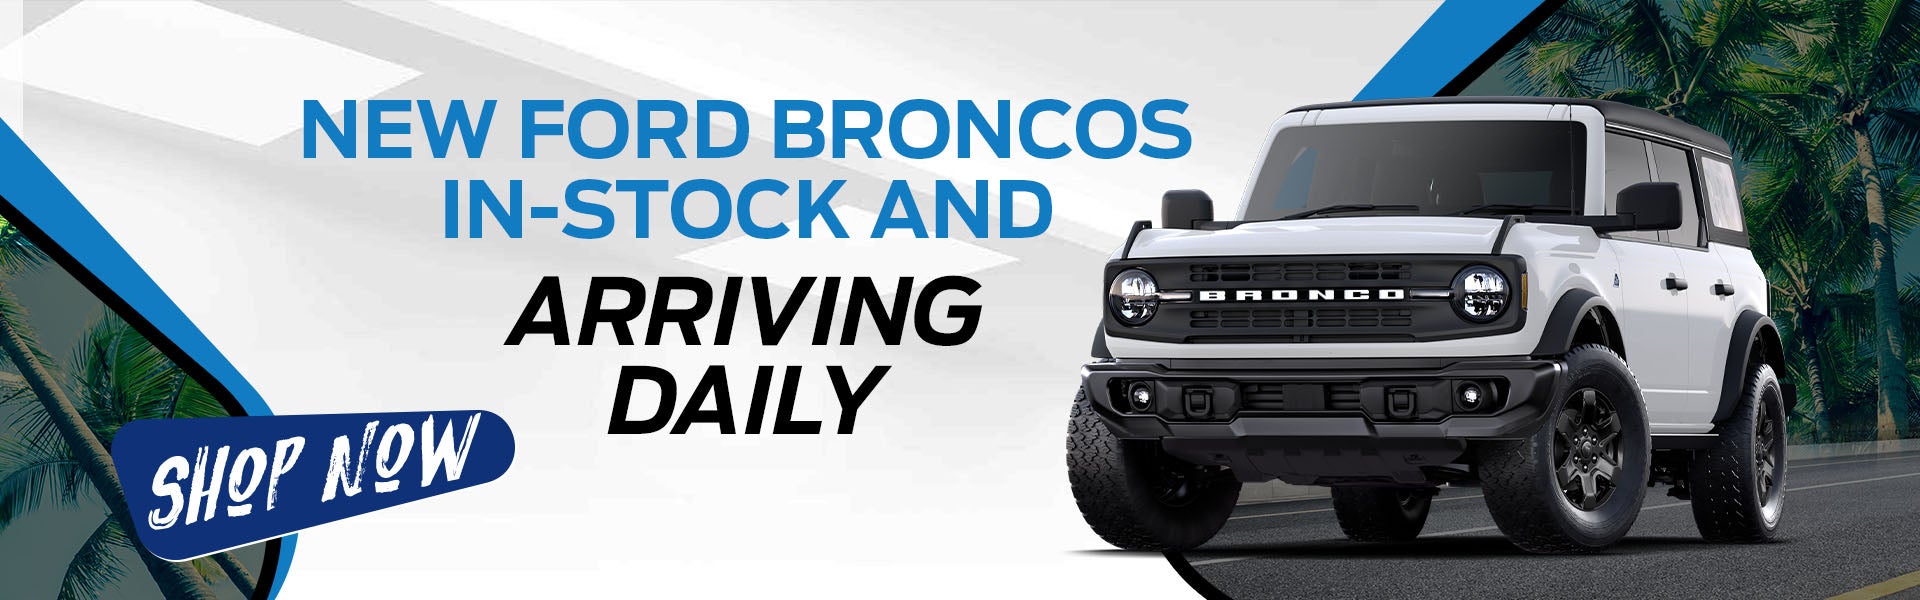 new ford broncos in-stock